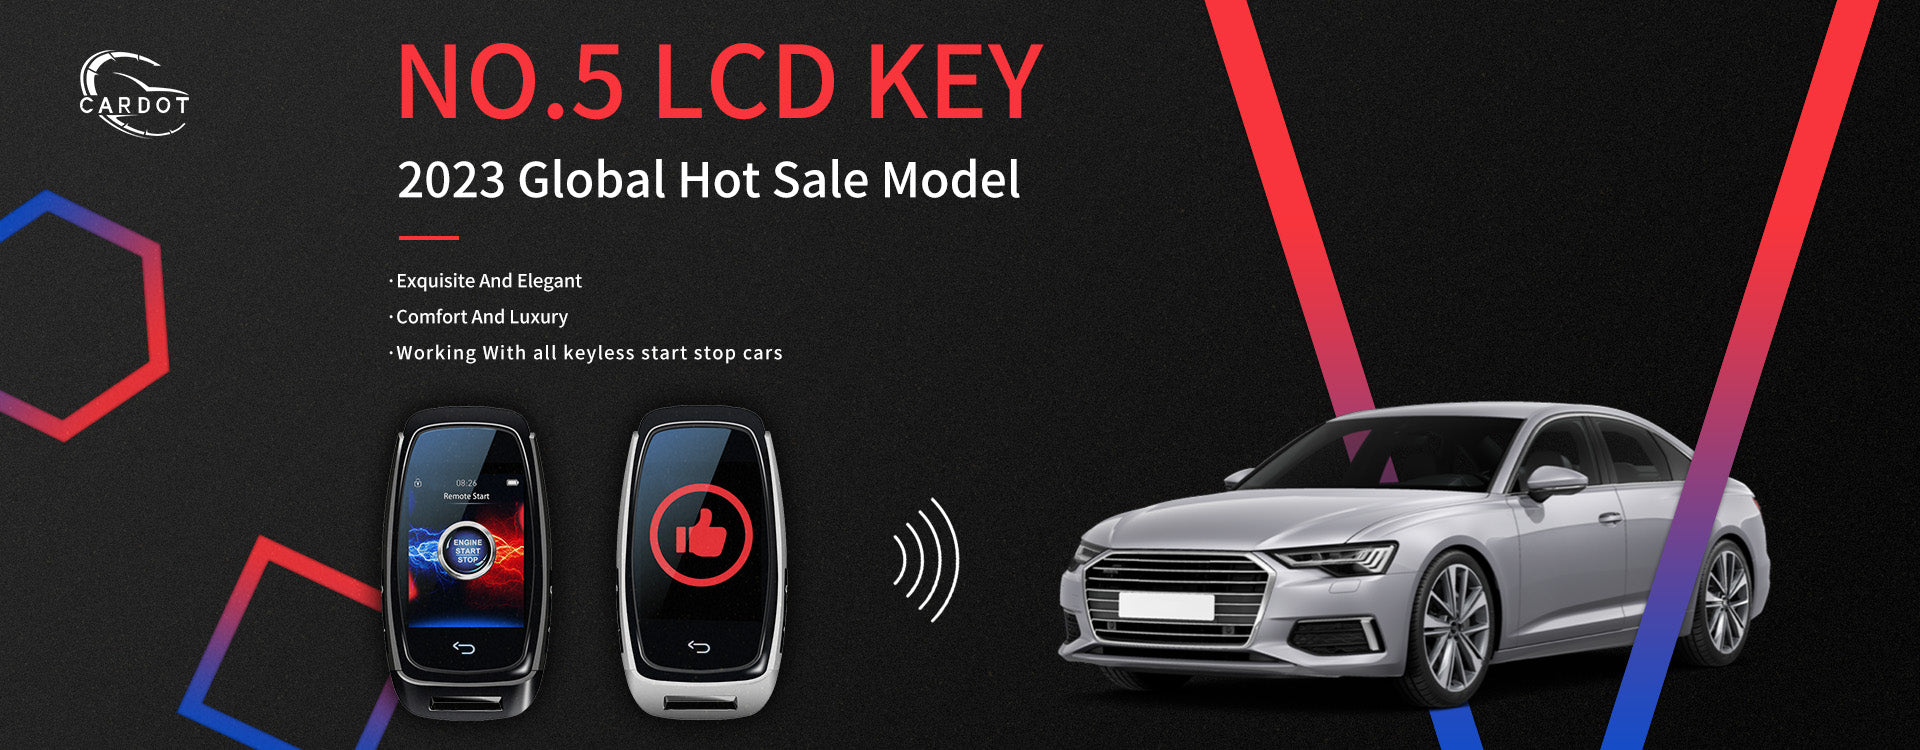 Load video: Car Lcd key works with all push button start stop car,smart car alarm,,keyless remote start,gsm gps car alarm,cardot factory patent product,brand protection,certification passed.